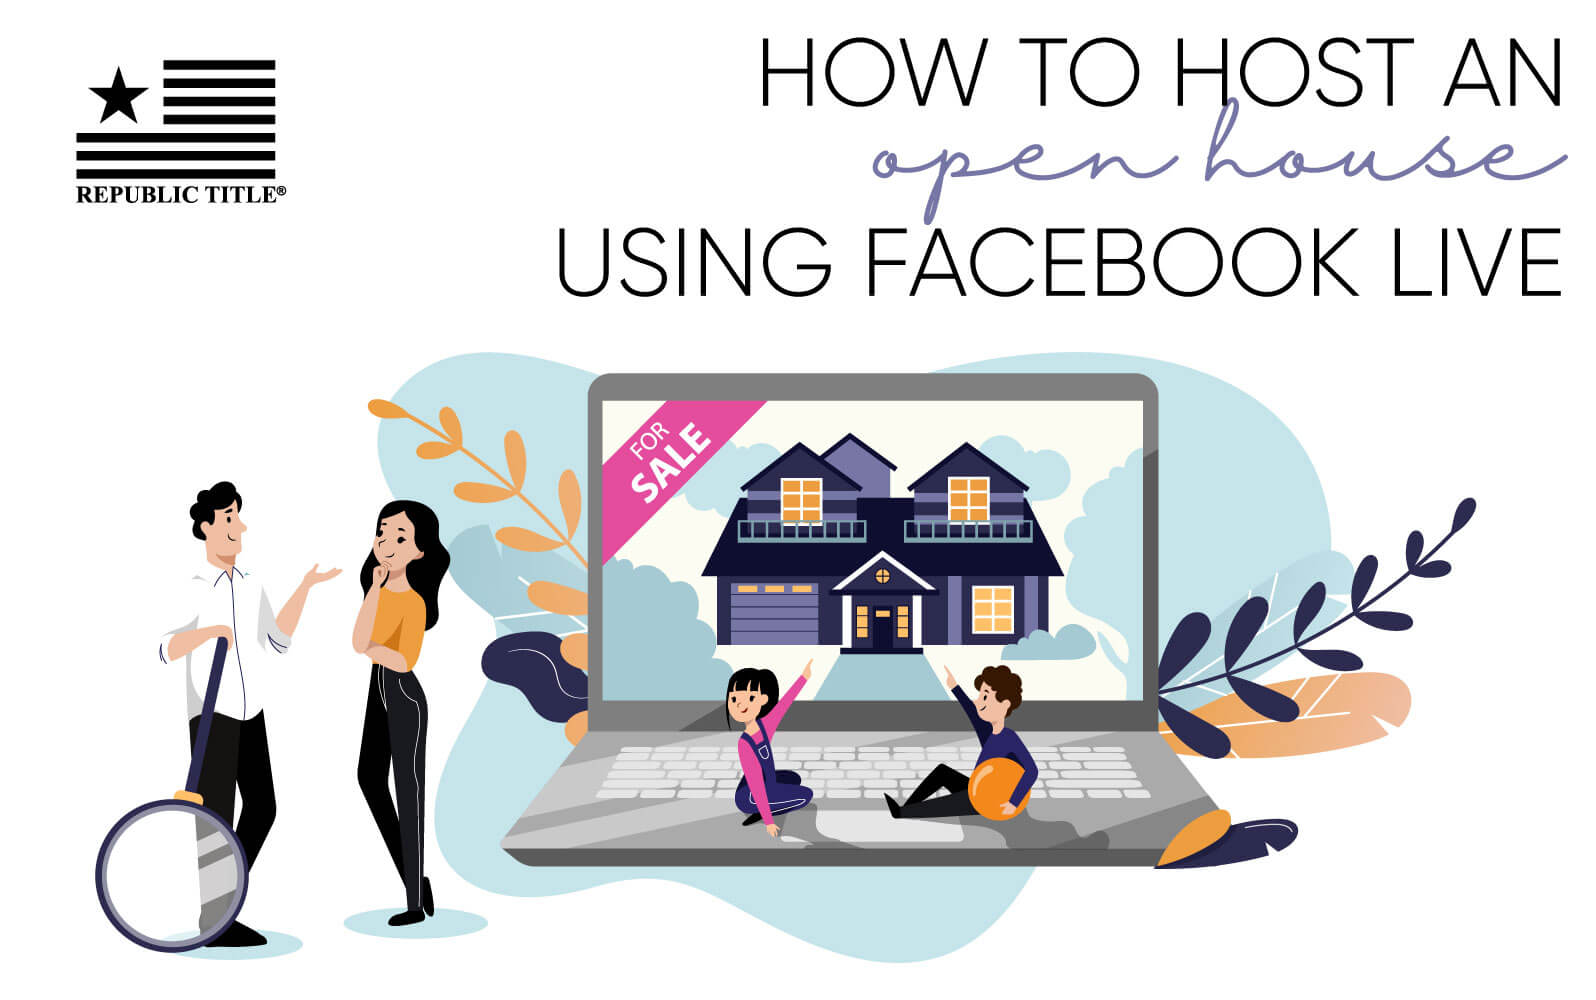 How to Host an Open House Using Facebook Live